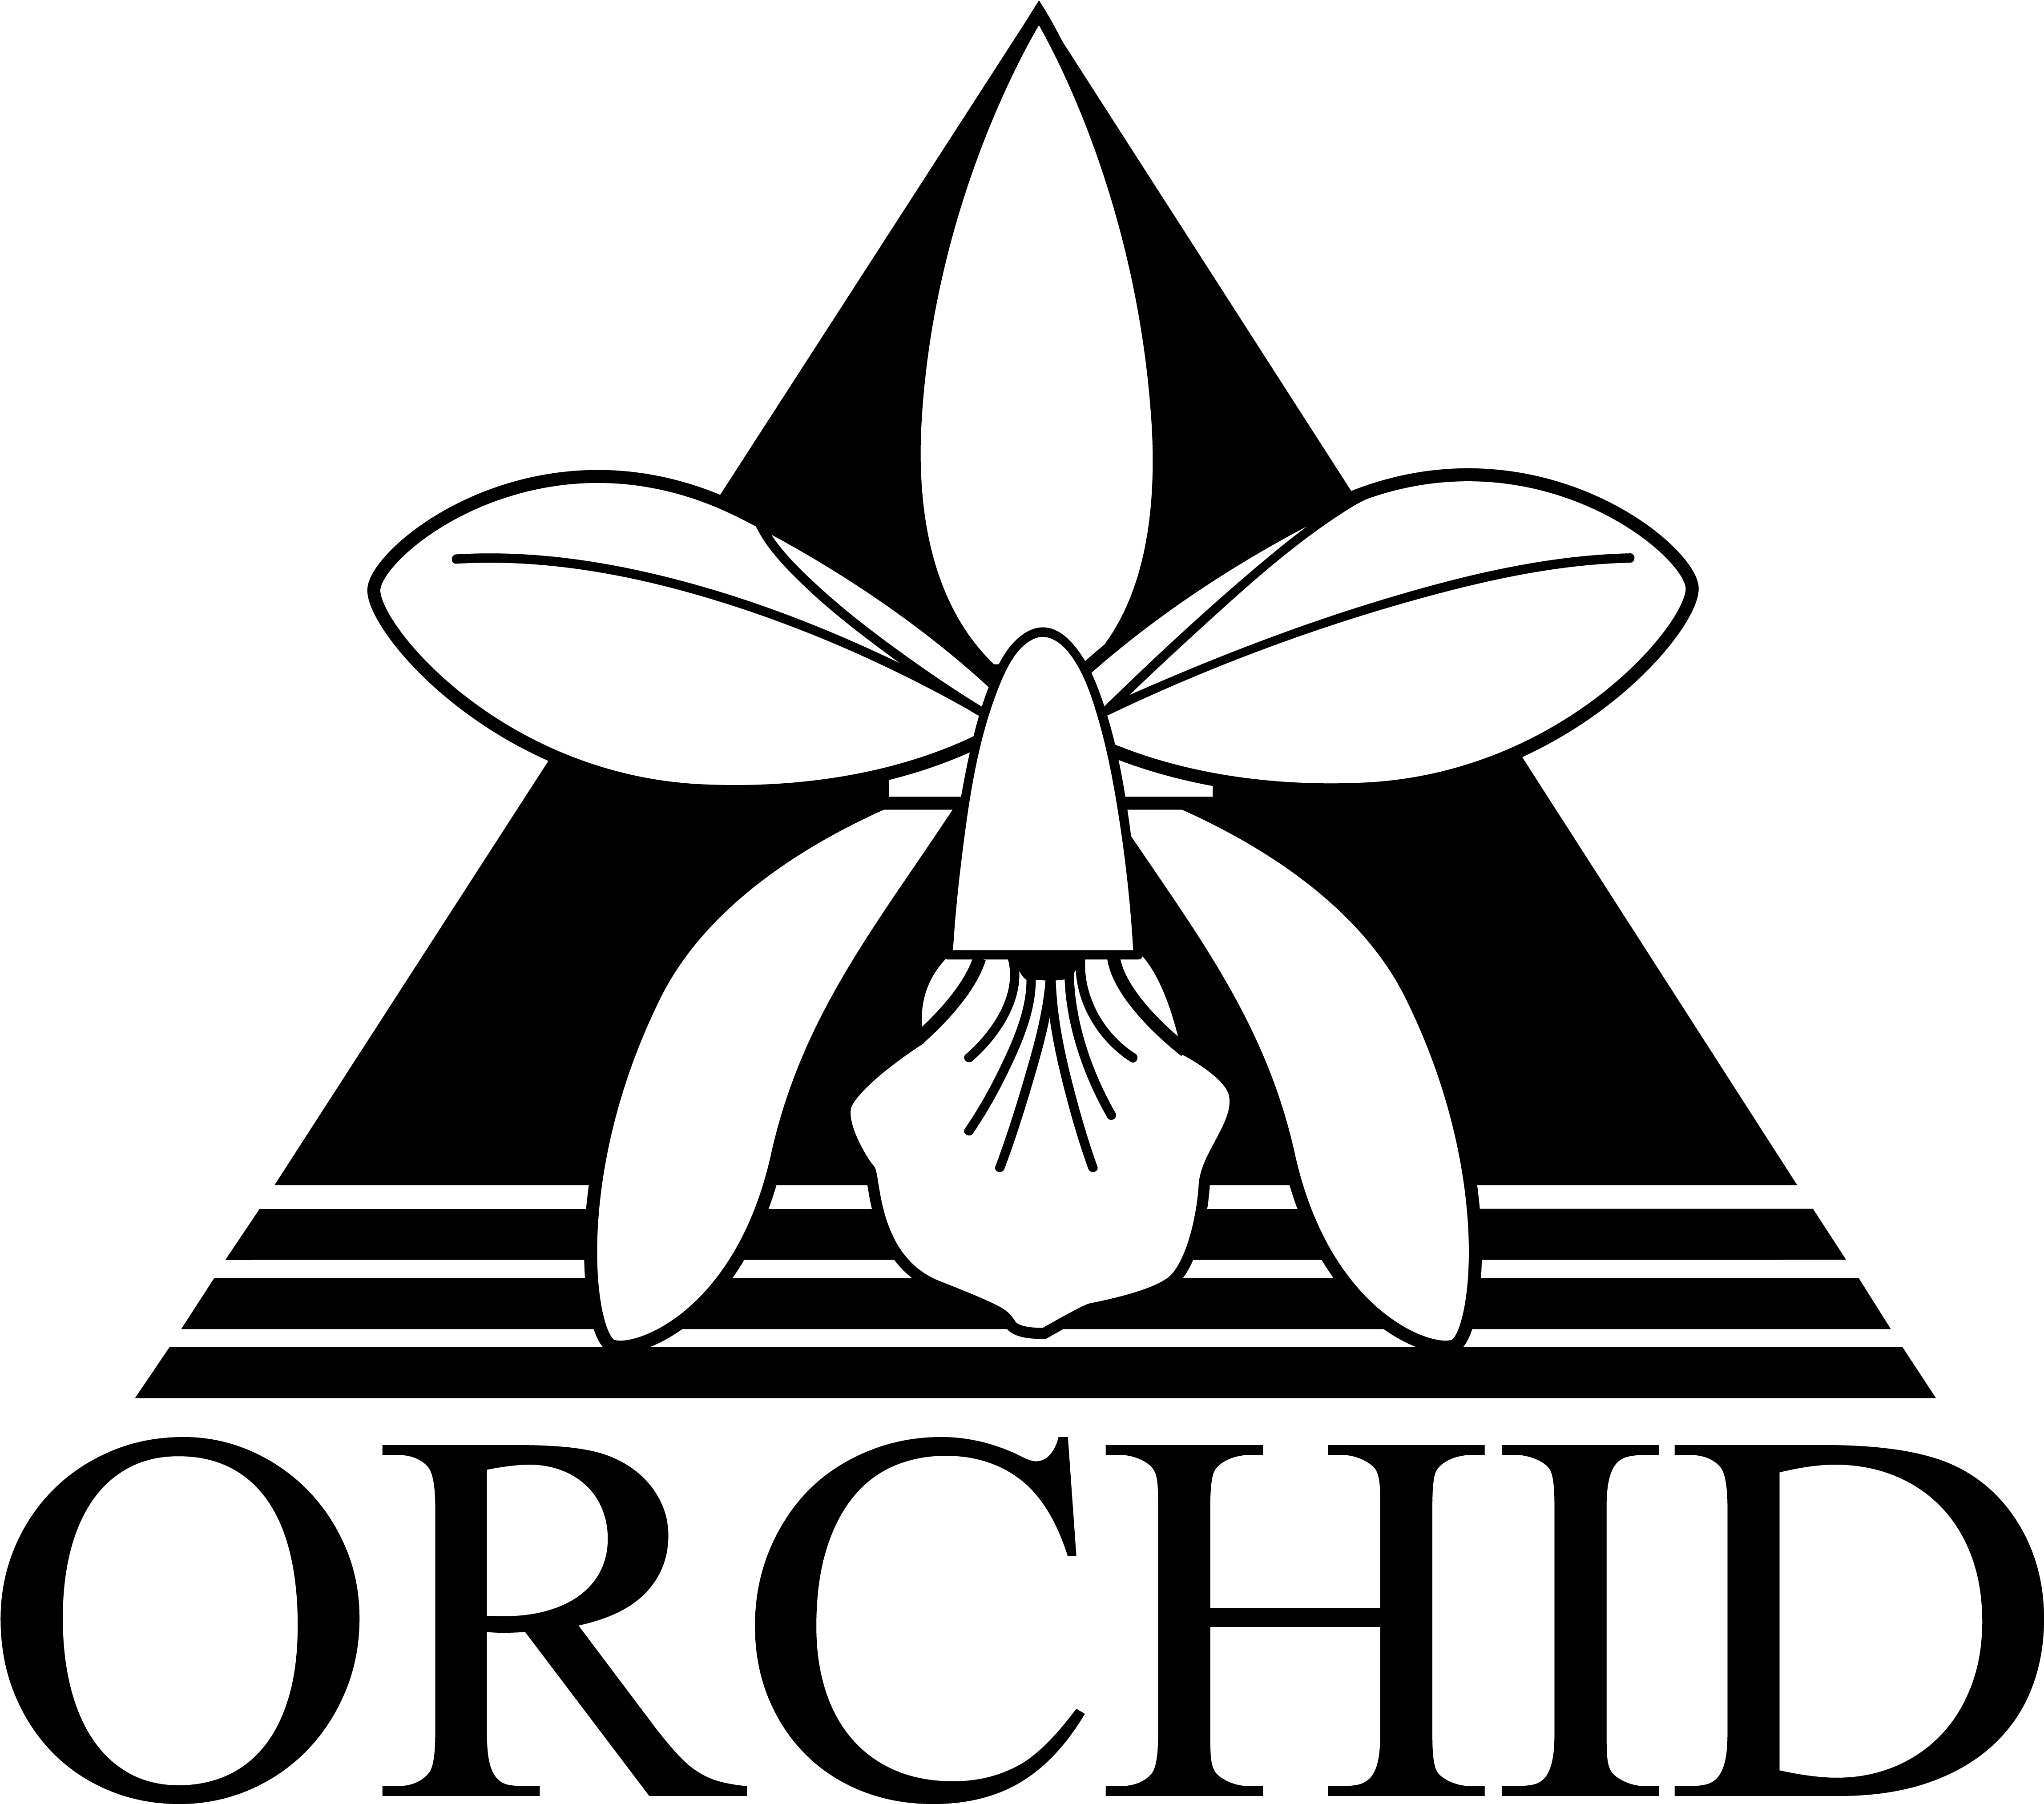 I Could Not Find A Good Quality Orchid Technology Logo - Hereford Community Foundation (4667x4764)